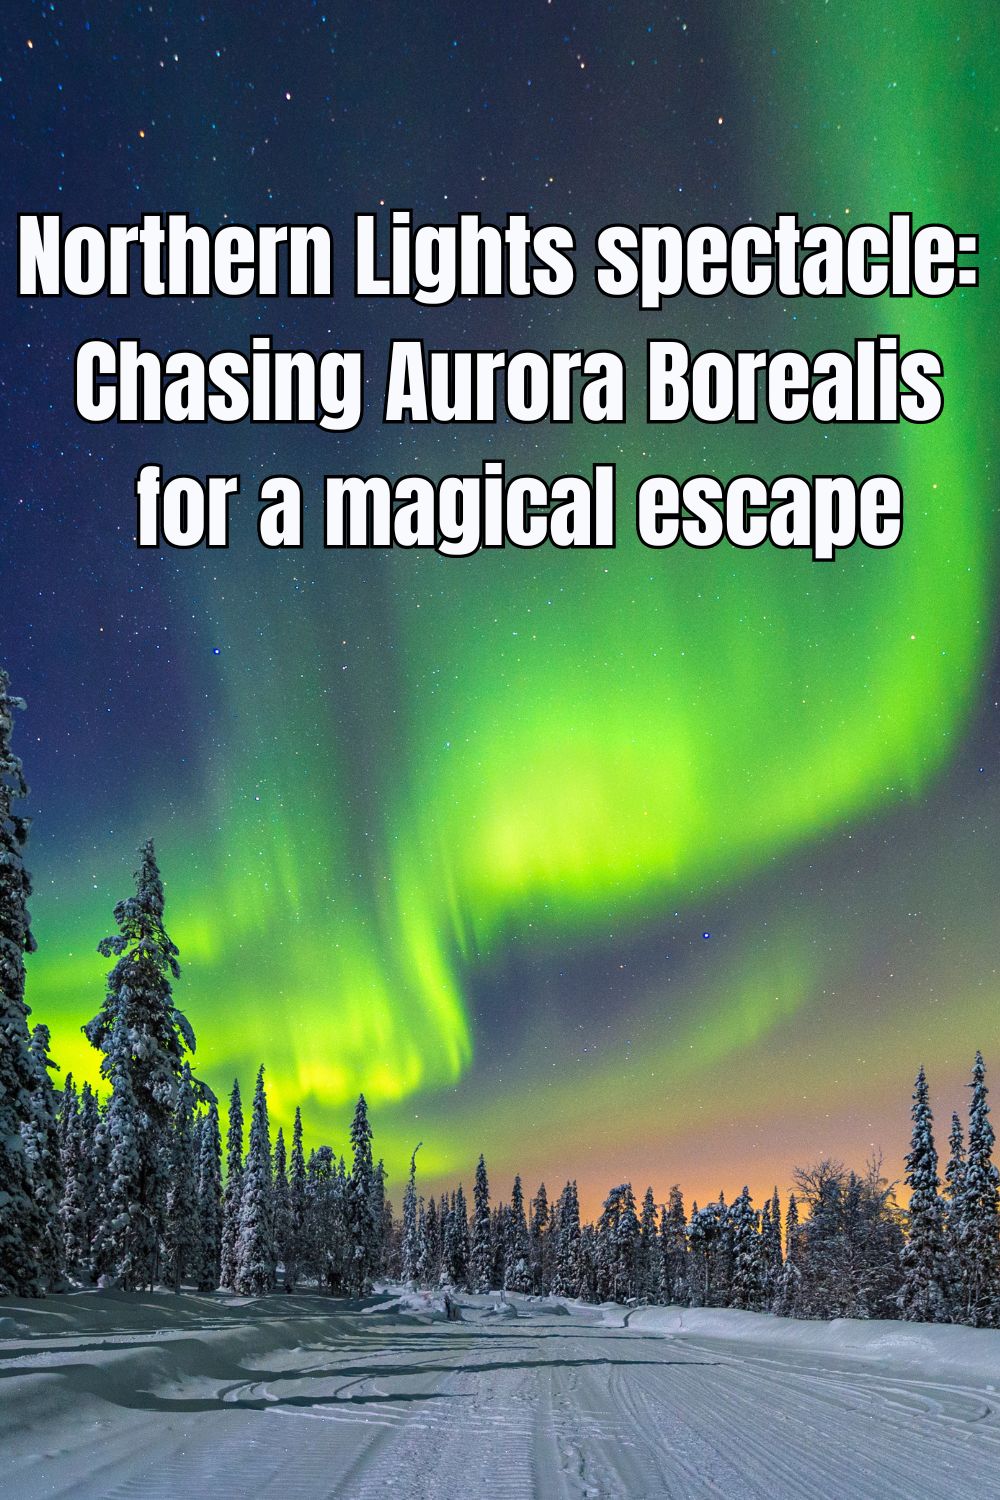 Northern Lights spectacle chasing Aurora Borealis for a magical escape 